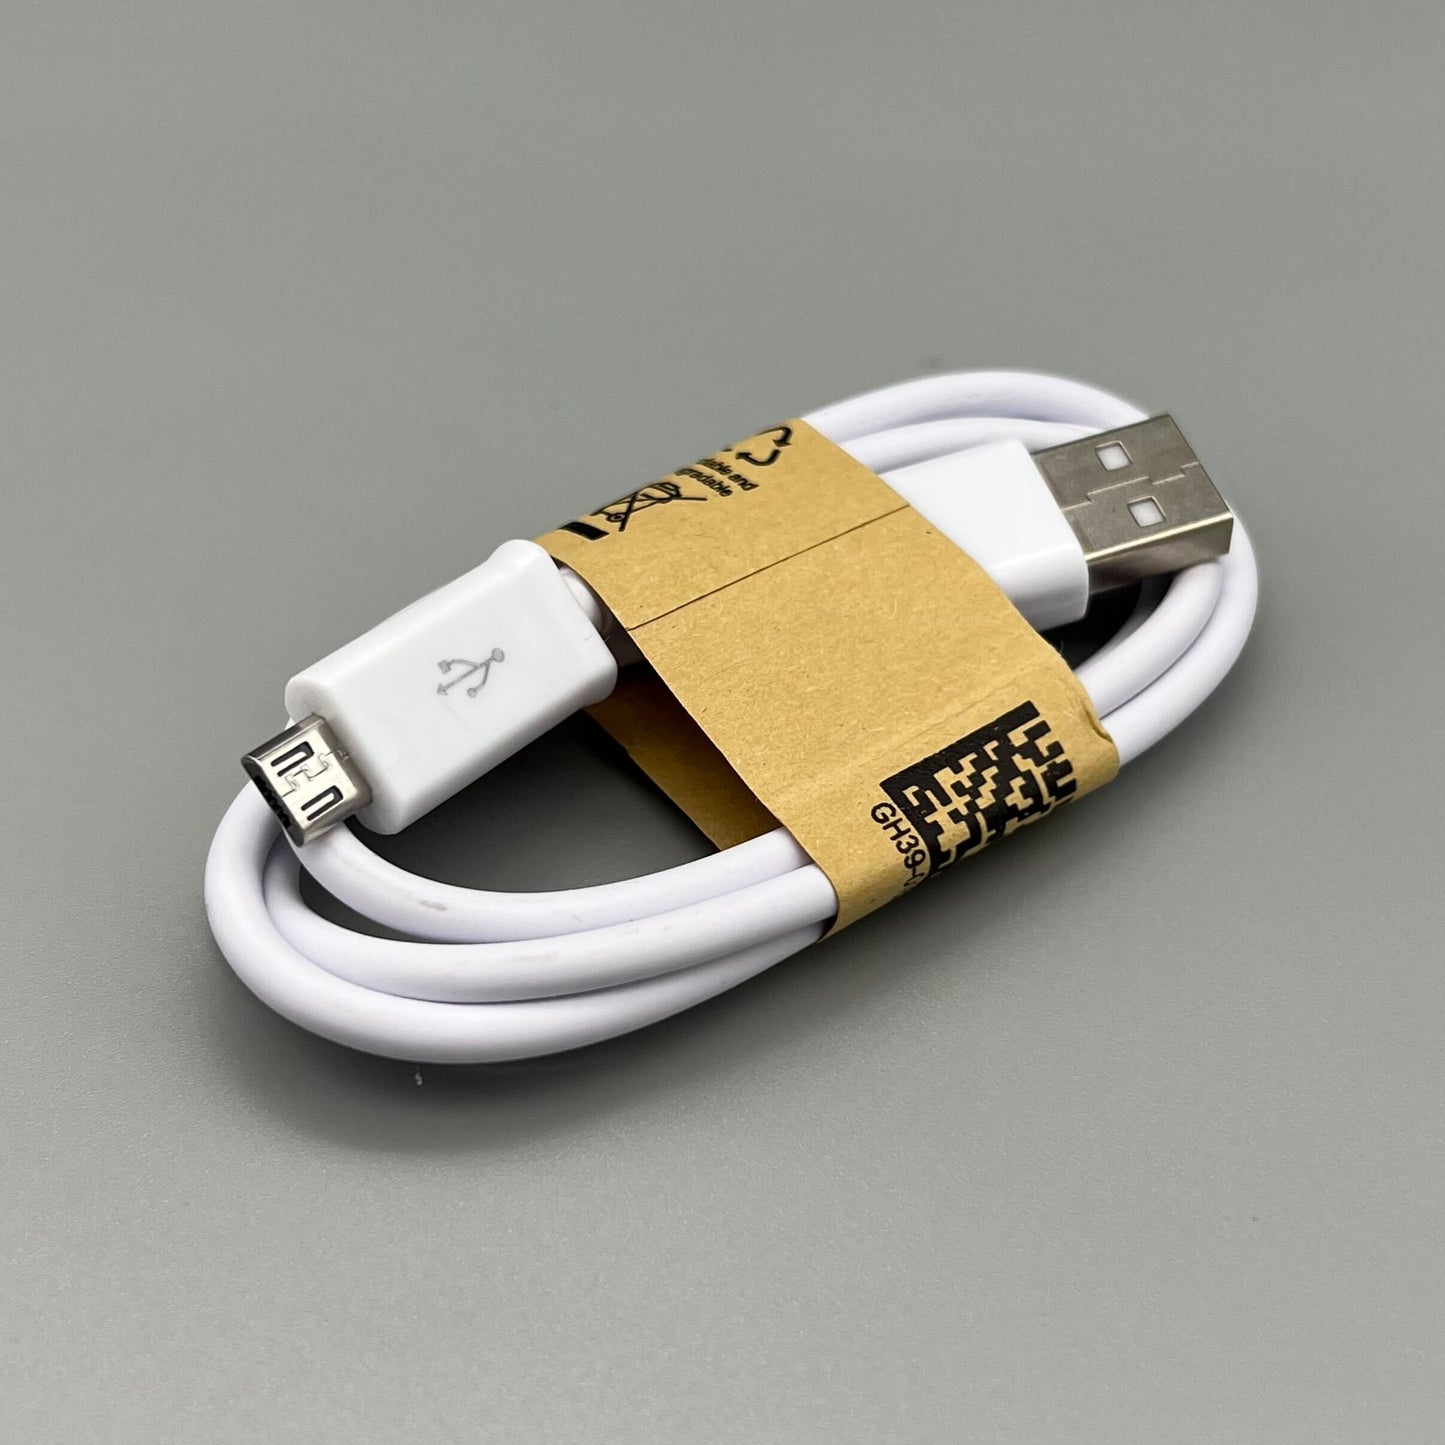 5V2A Micro USB Cable and Wall Charger